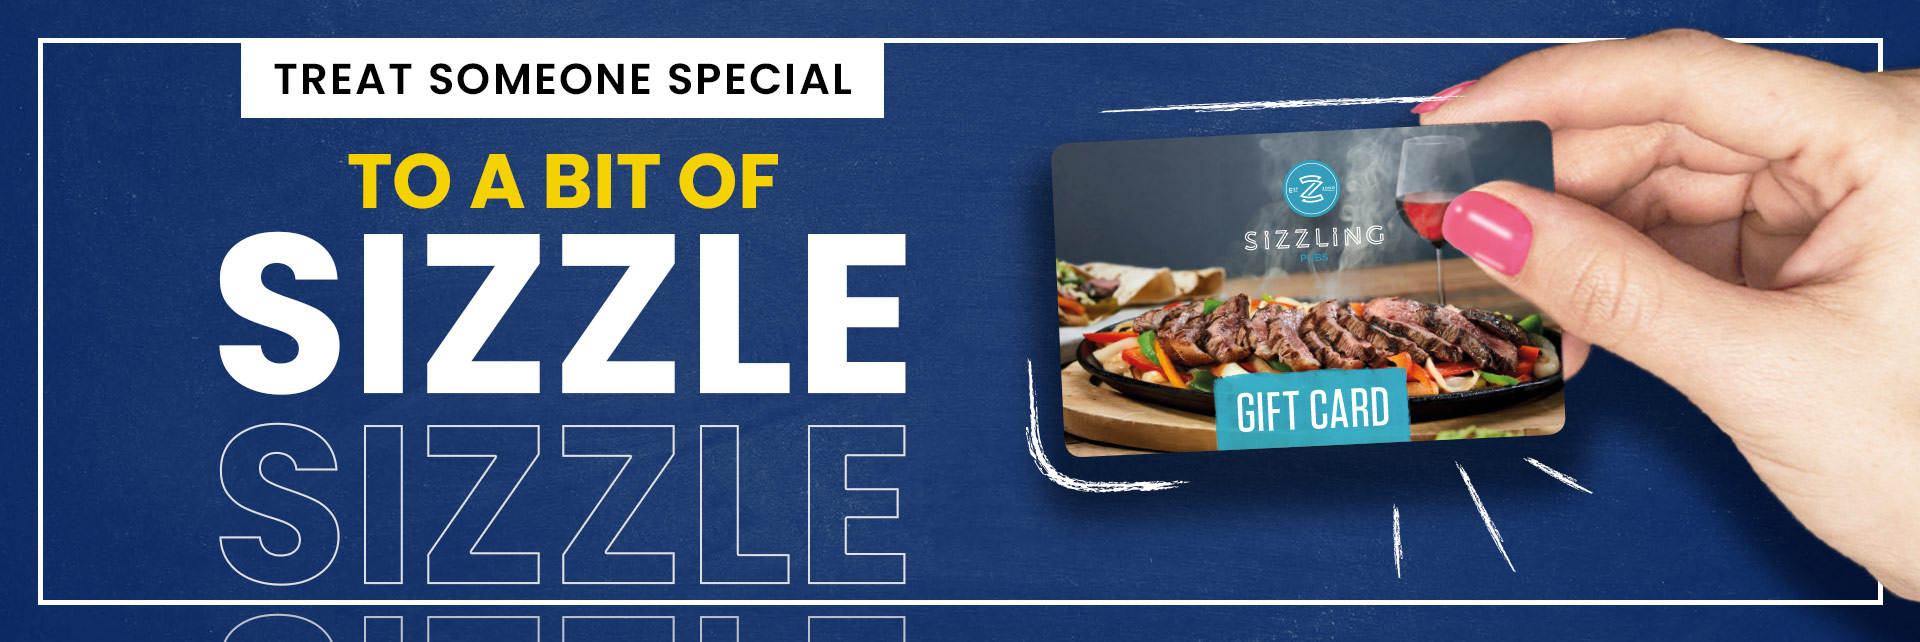 Sizzling Pubs Gift Card at Cock Inn in Leighton Buzzard